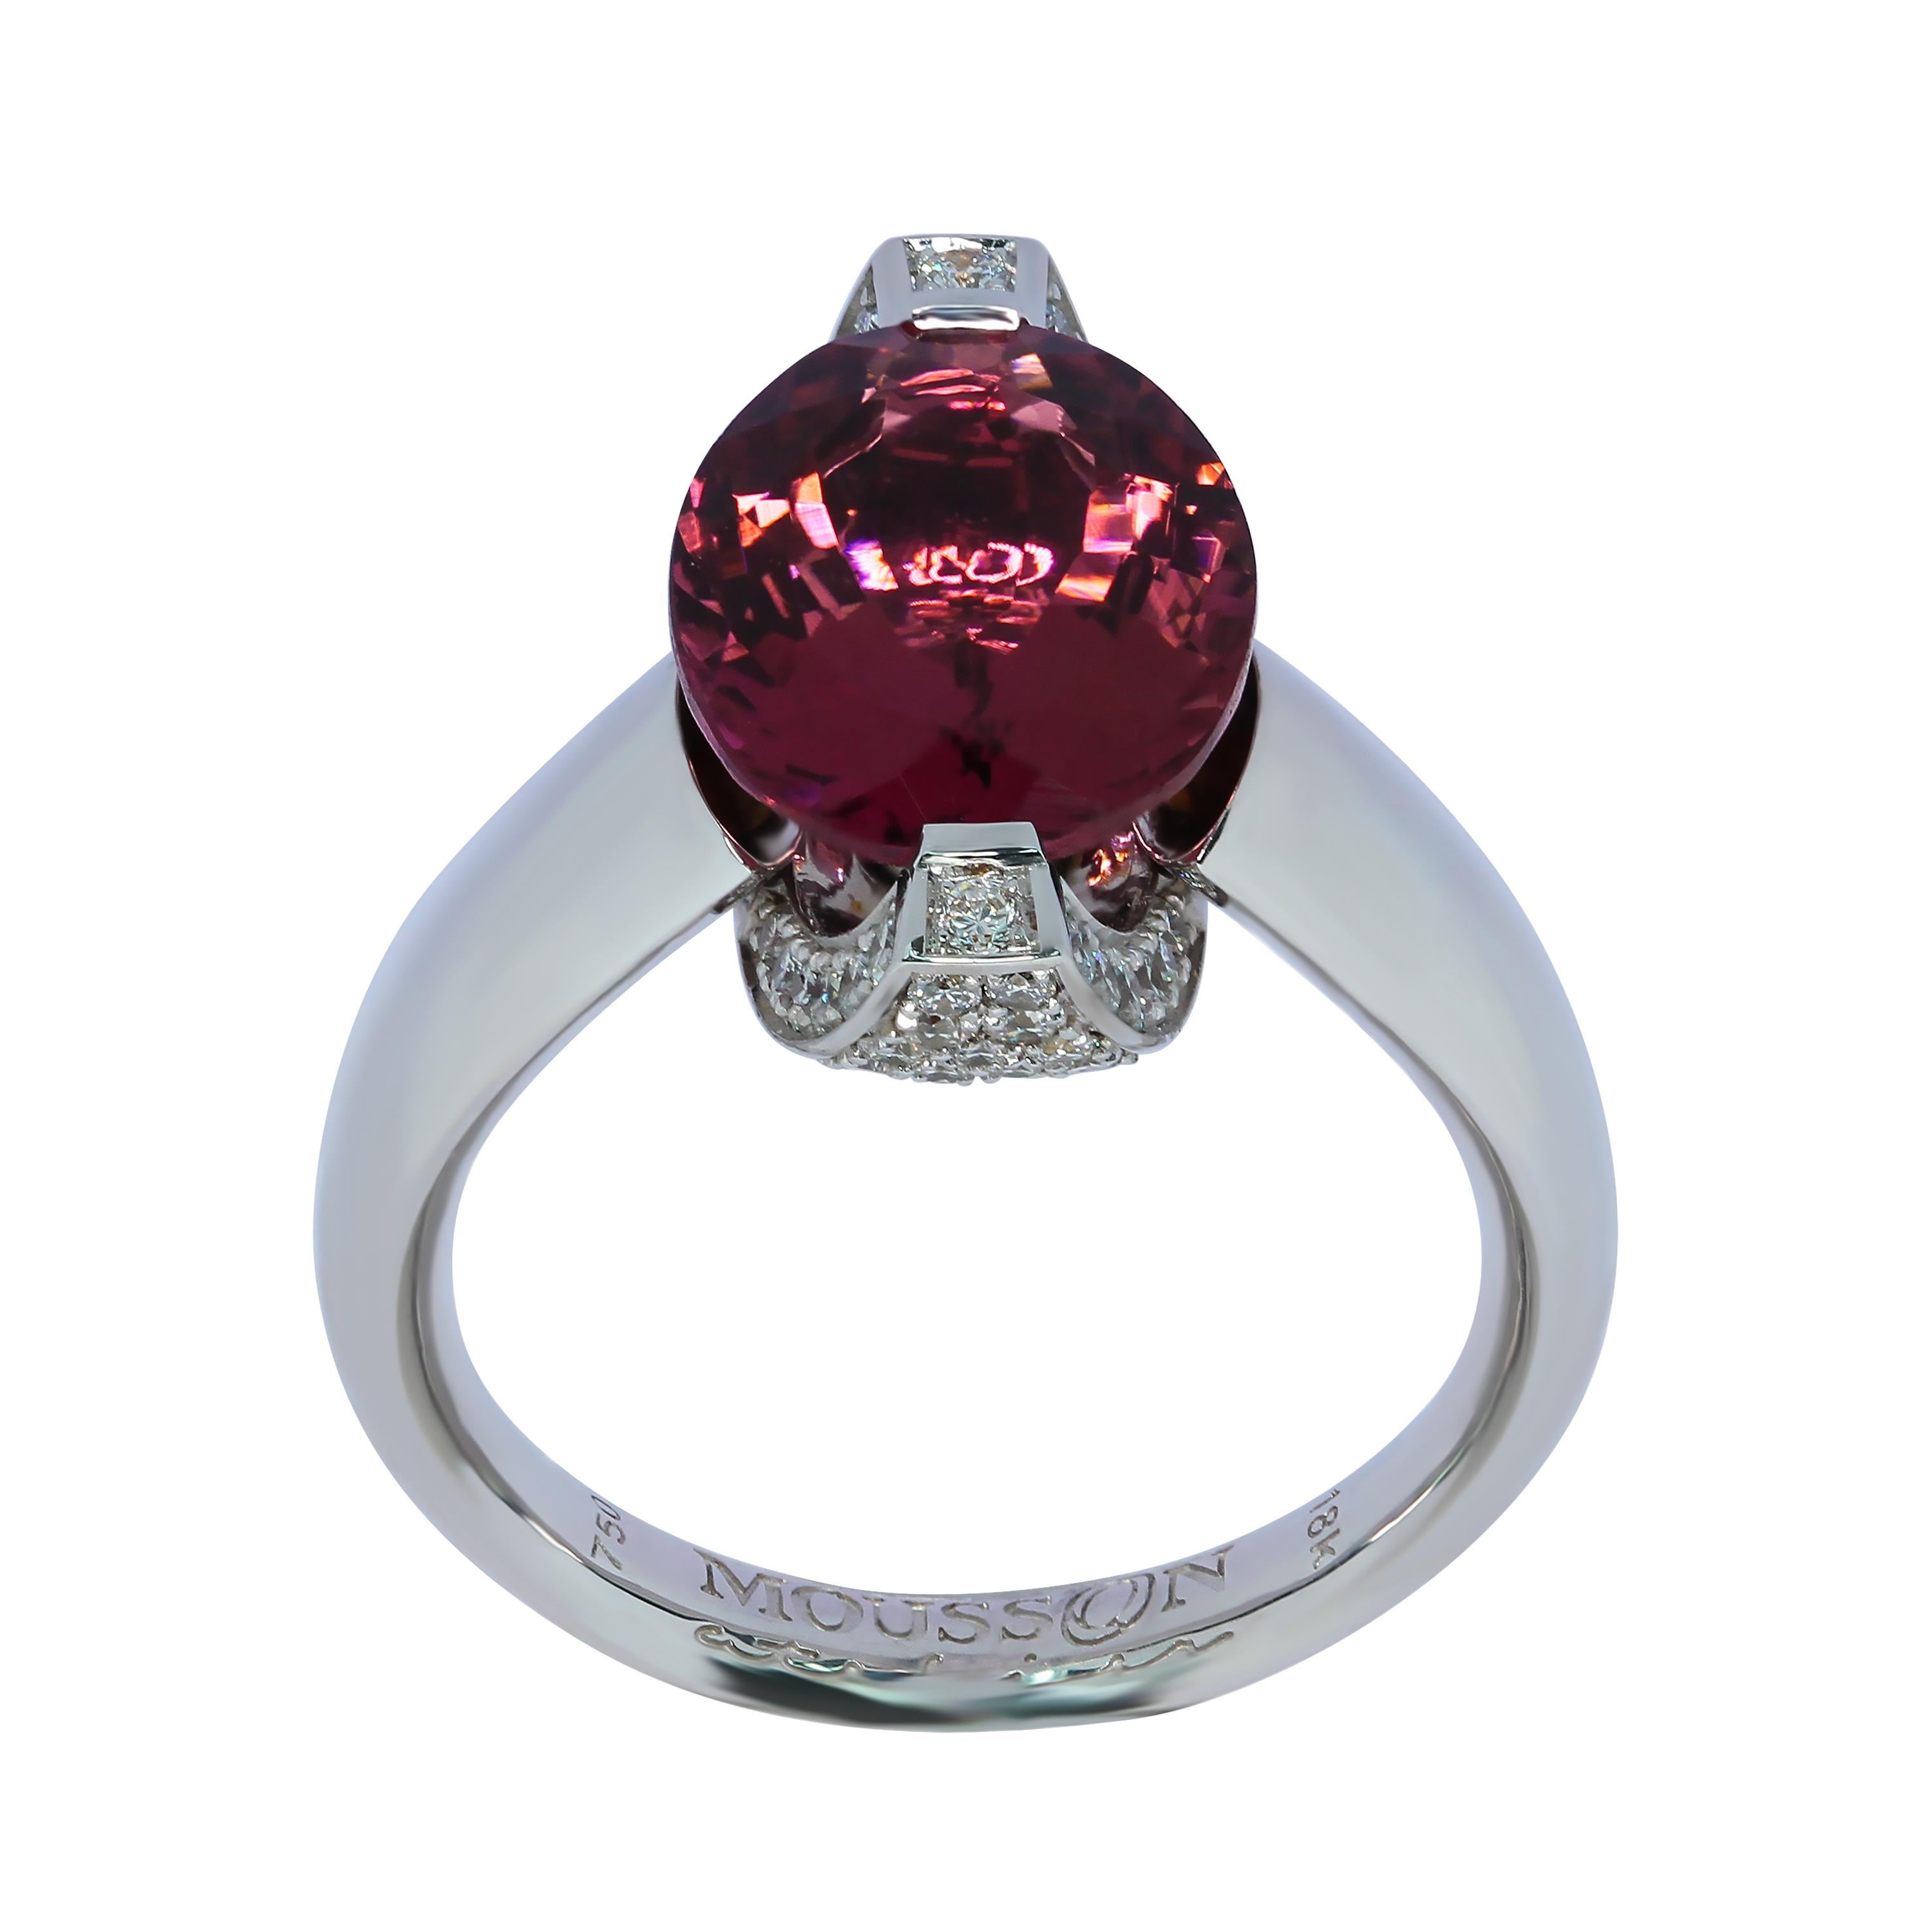 Pink Tourmaline Diamonds 18 Karat White Gold Moon Ring
When you look at this Ring, there are some absolutely cosmic associations. And there is a reason for this. The central 4.45 Carat Hot Pink Tourmaline 